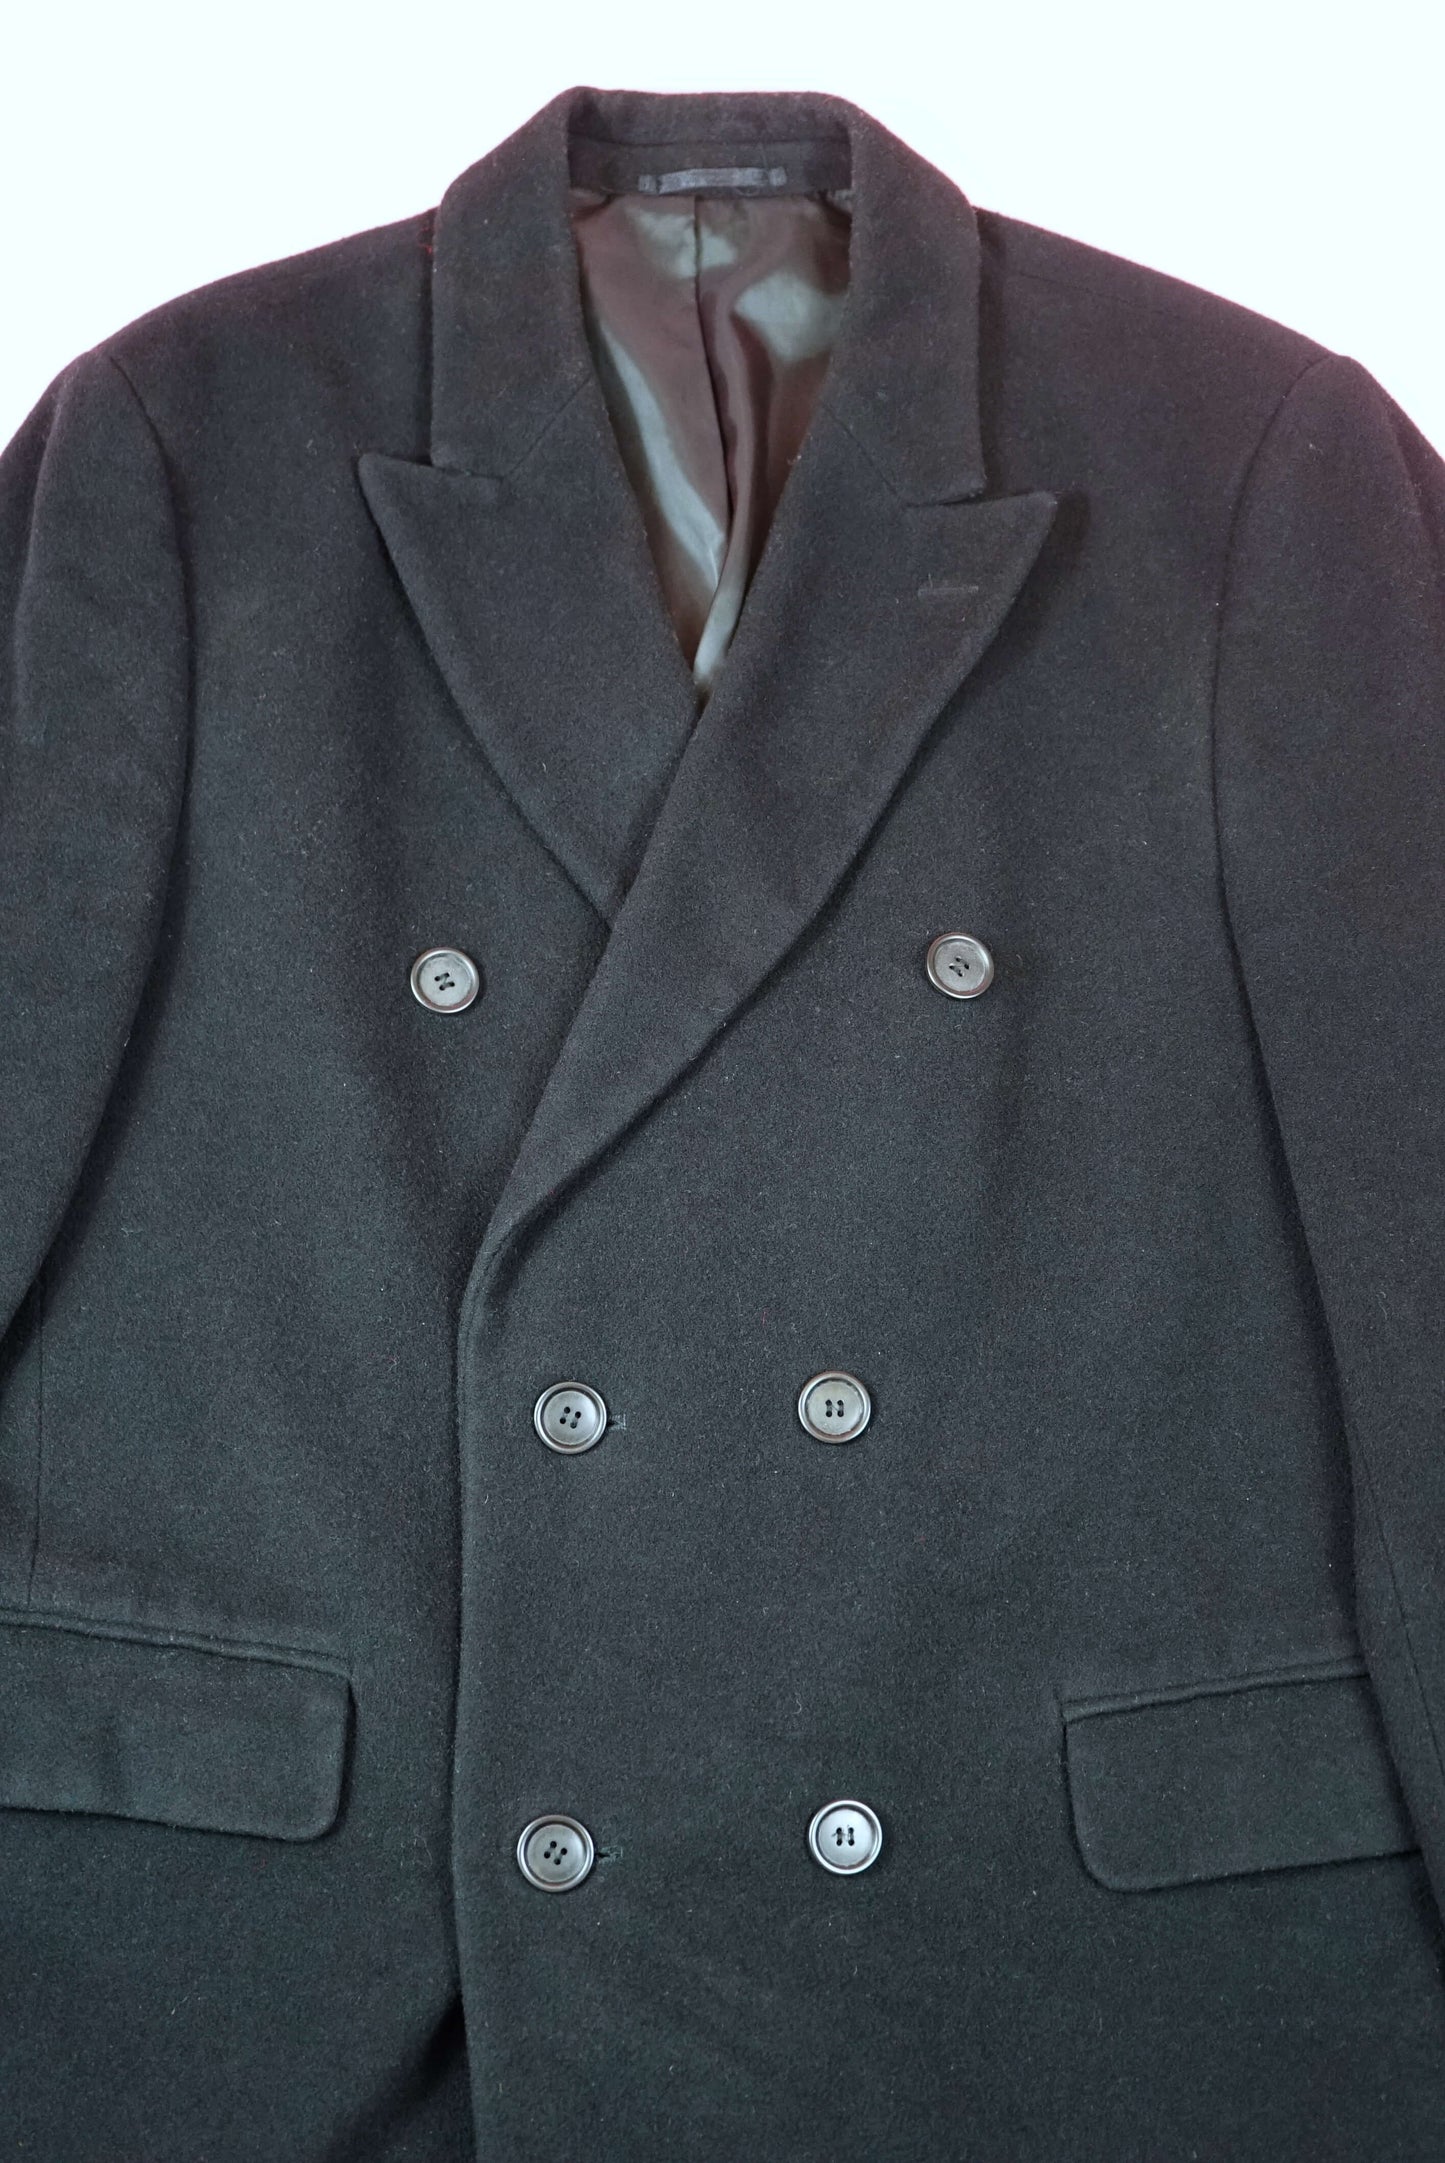 Black Double Breasted Wool Cashmere Overcoat 3/4 Winter Coat Size XL